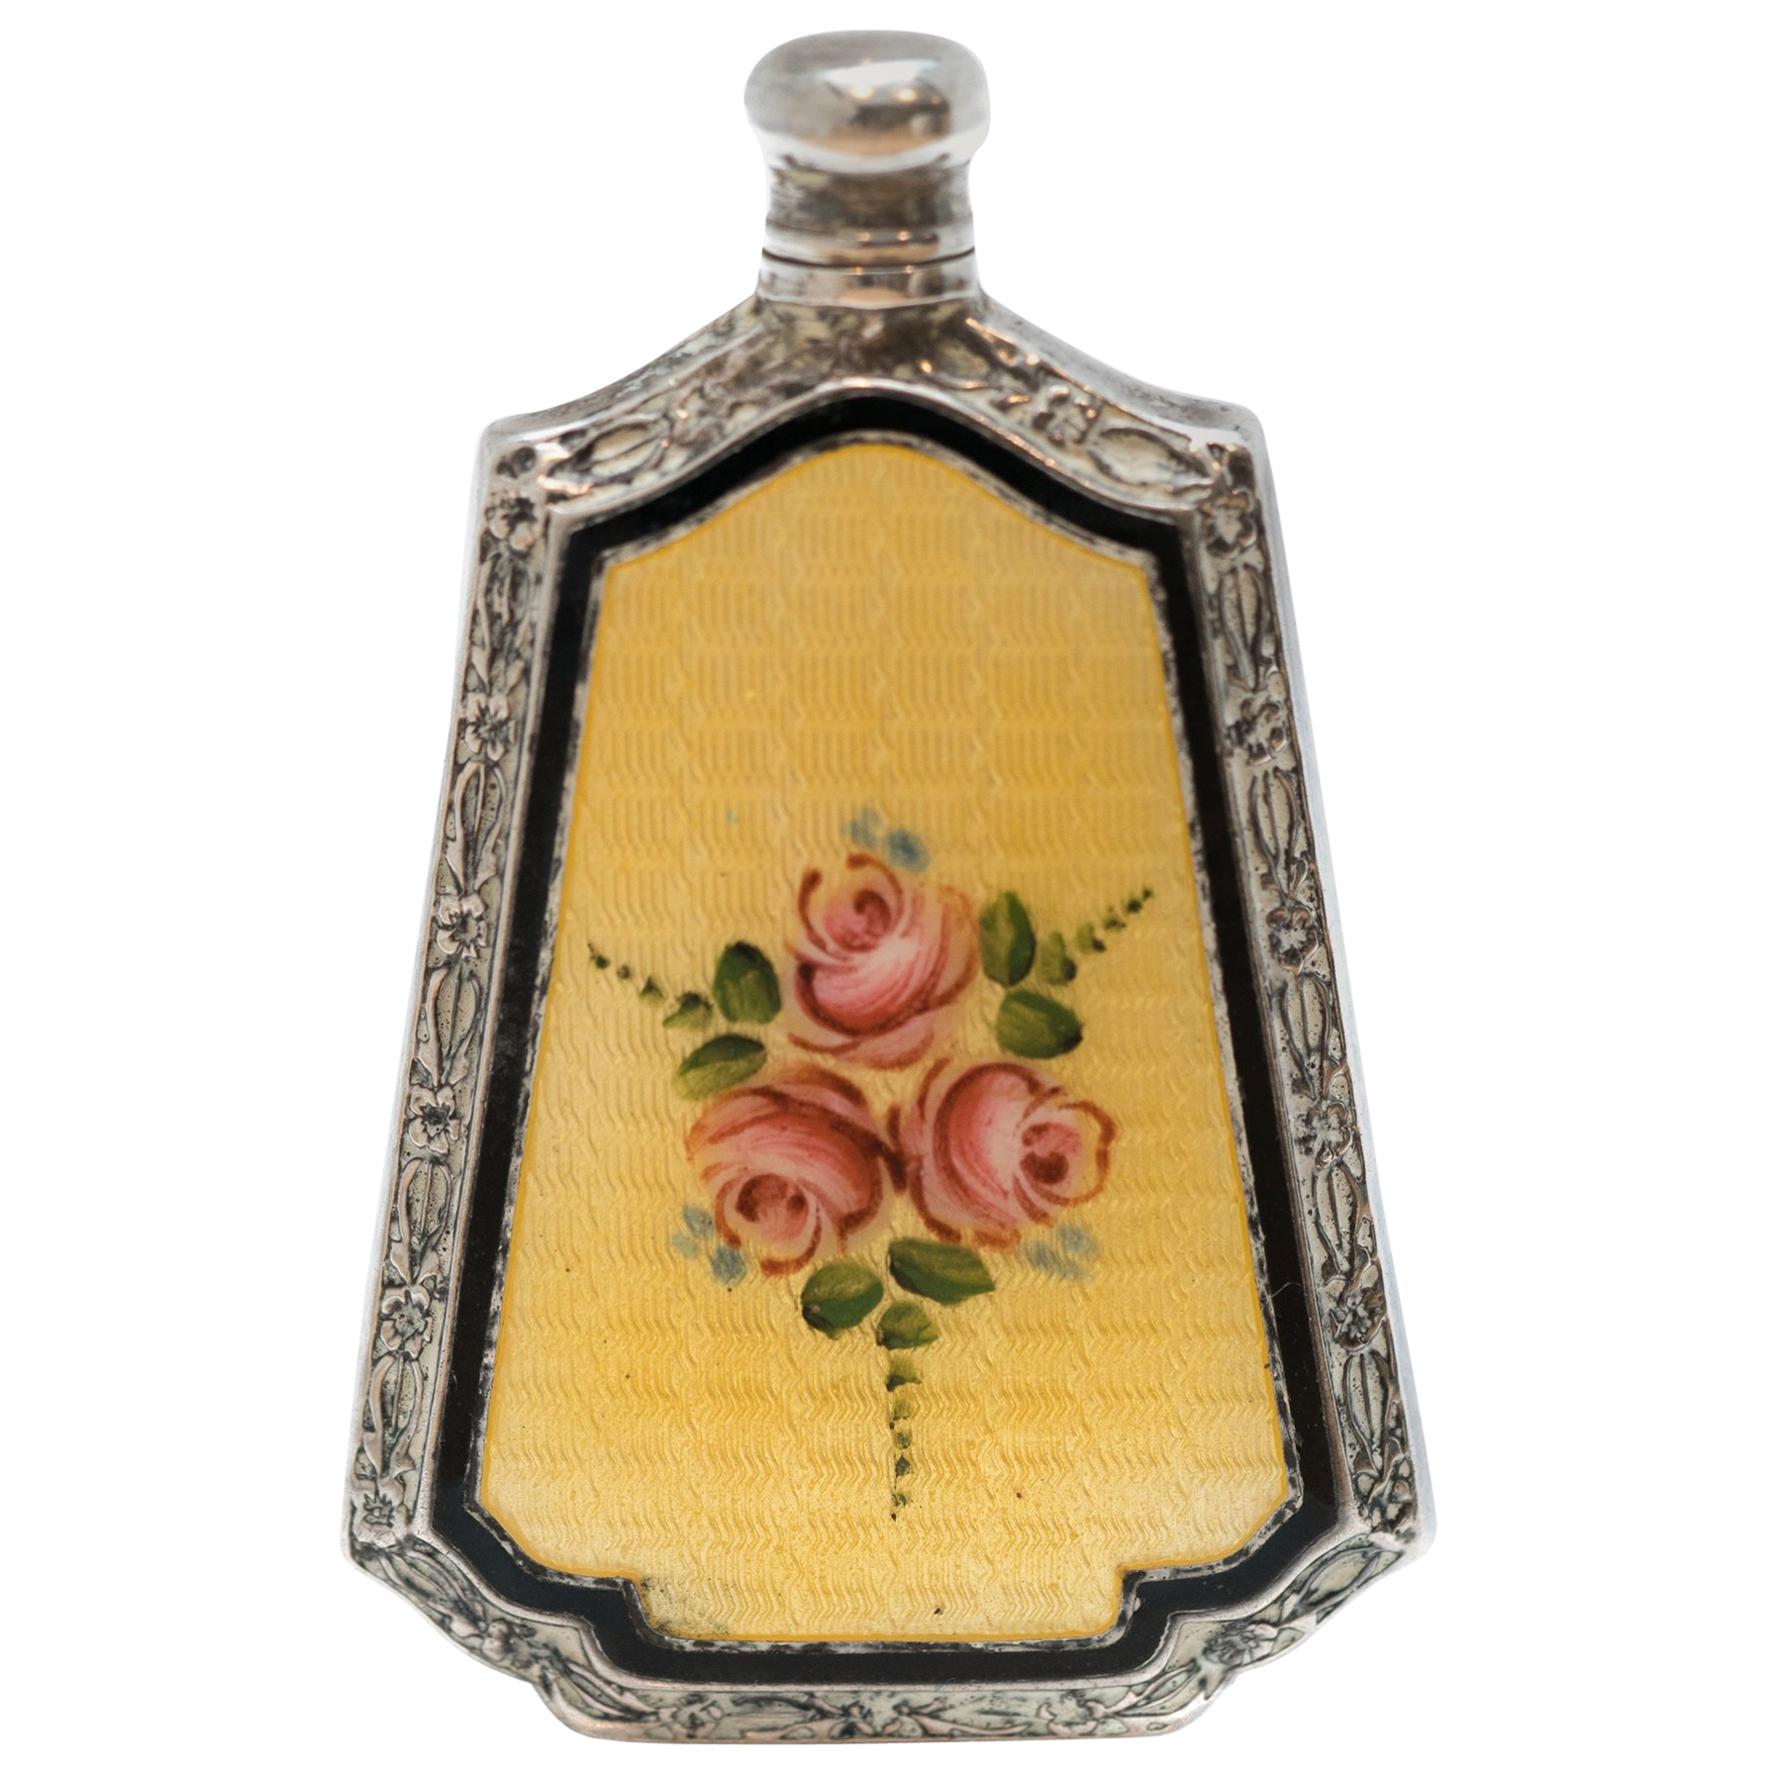 1800s Antique Sterling Silver and Guilloche Enamel Perfume Flask